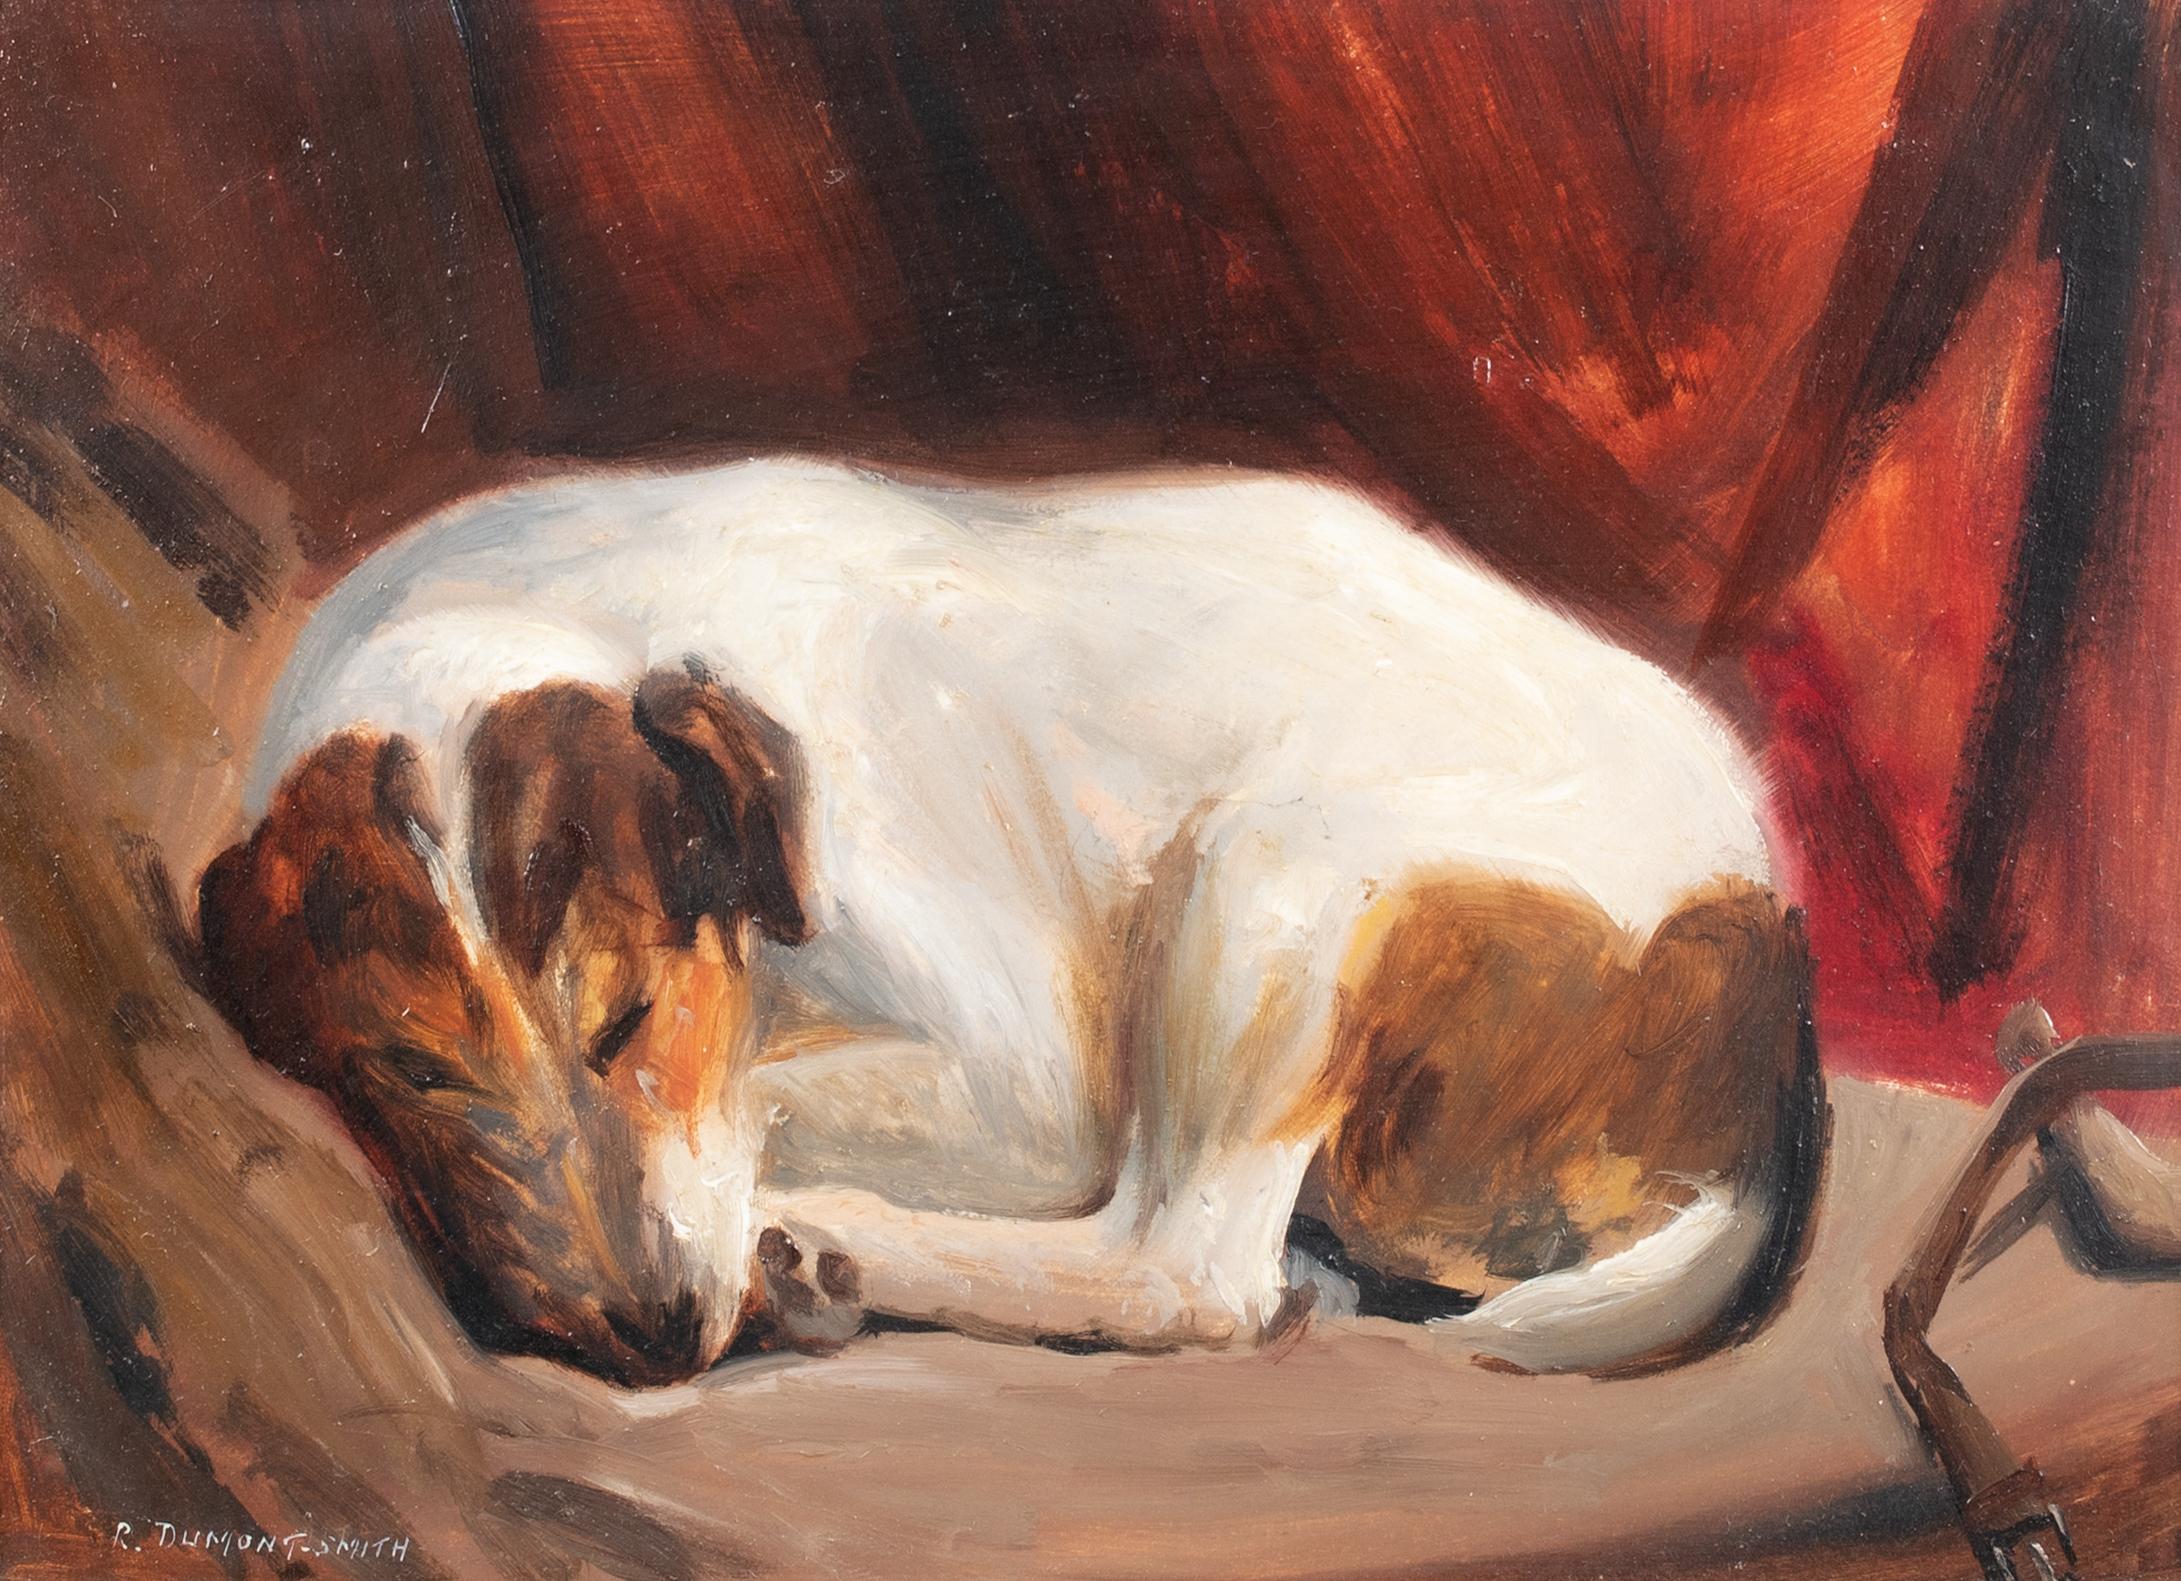 Portrait Of  Sleeping Jack Russell Terrier, circa 1900

by Robert Dumont Smith

Crirca 1900 English portrait of a sleeping Jack Russell Terrier, oil on panel by Robert Dumont Smith. Excellent quality and condition intimate study of the dog asleep